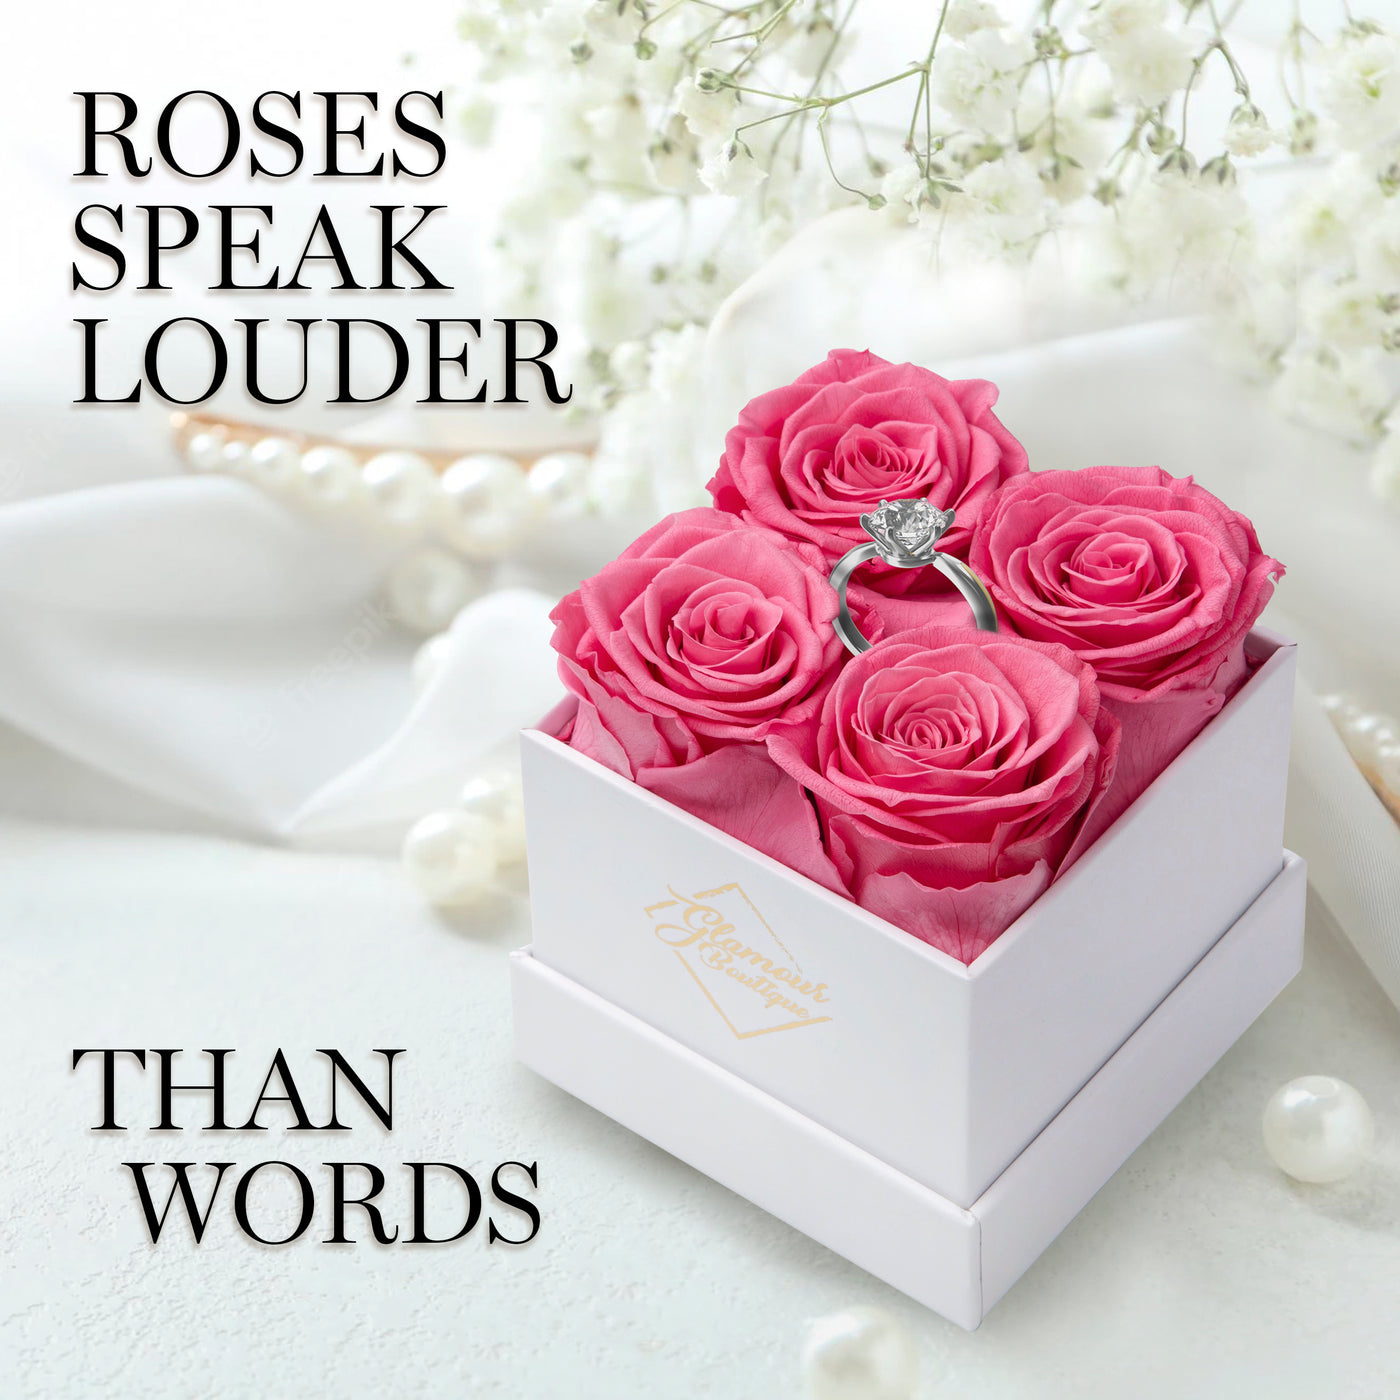 Preserved Roses in a Box Cased in A Square Gift Box with Lid - Pink